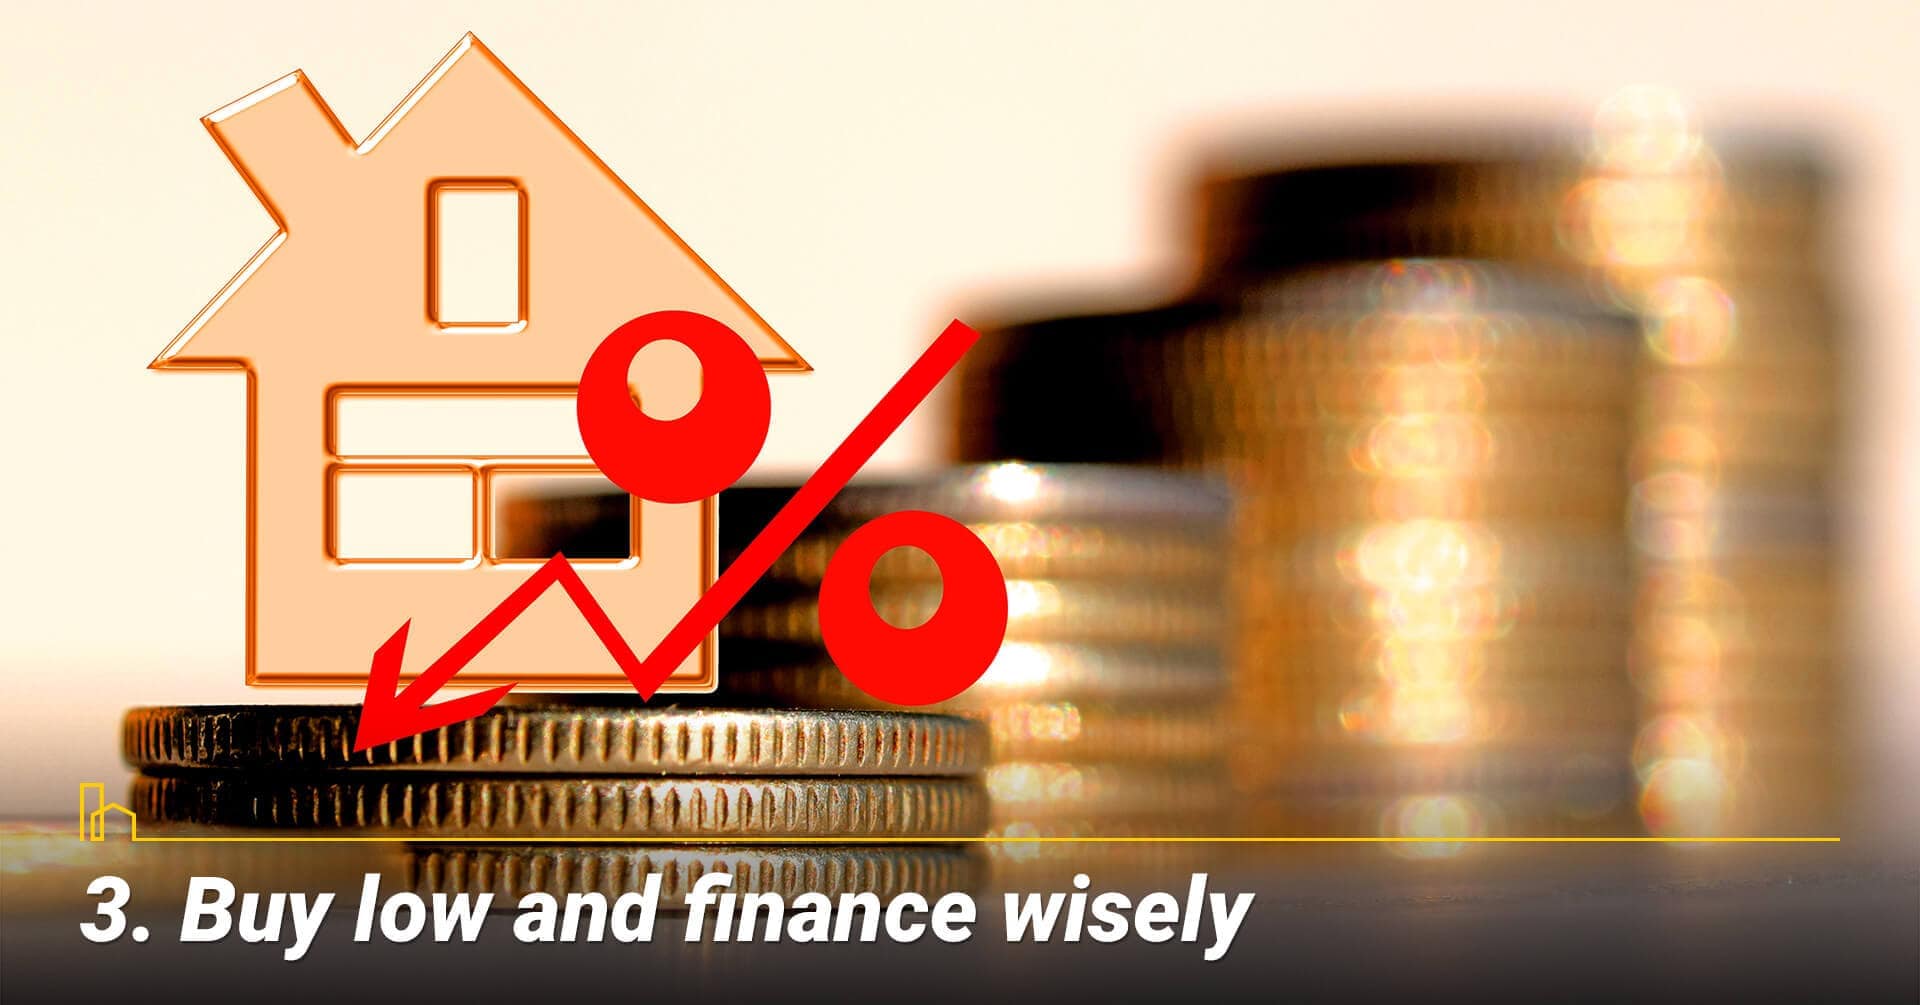 Buy low and finance wisely, look for a good property and finance it wisely